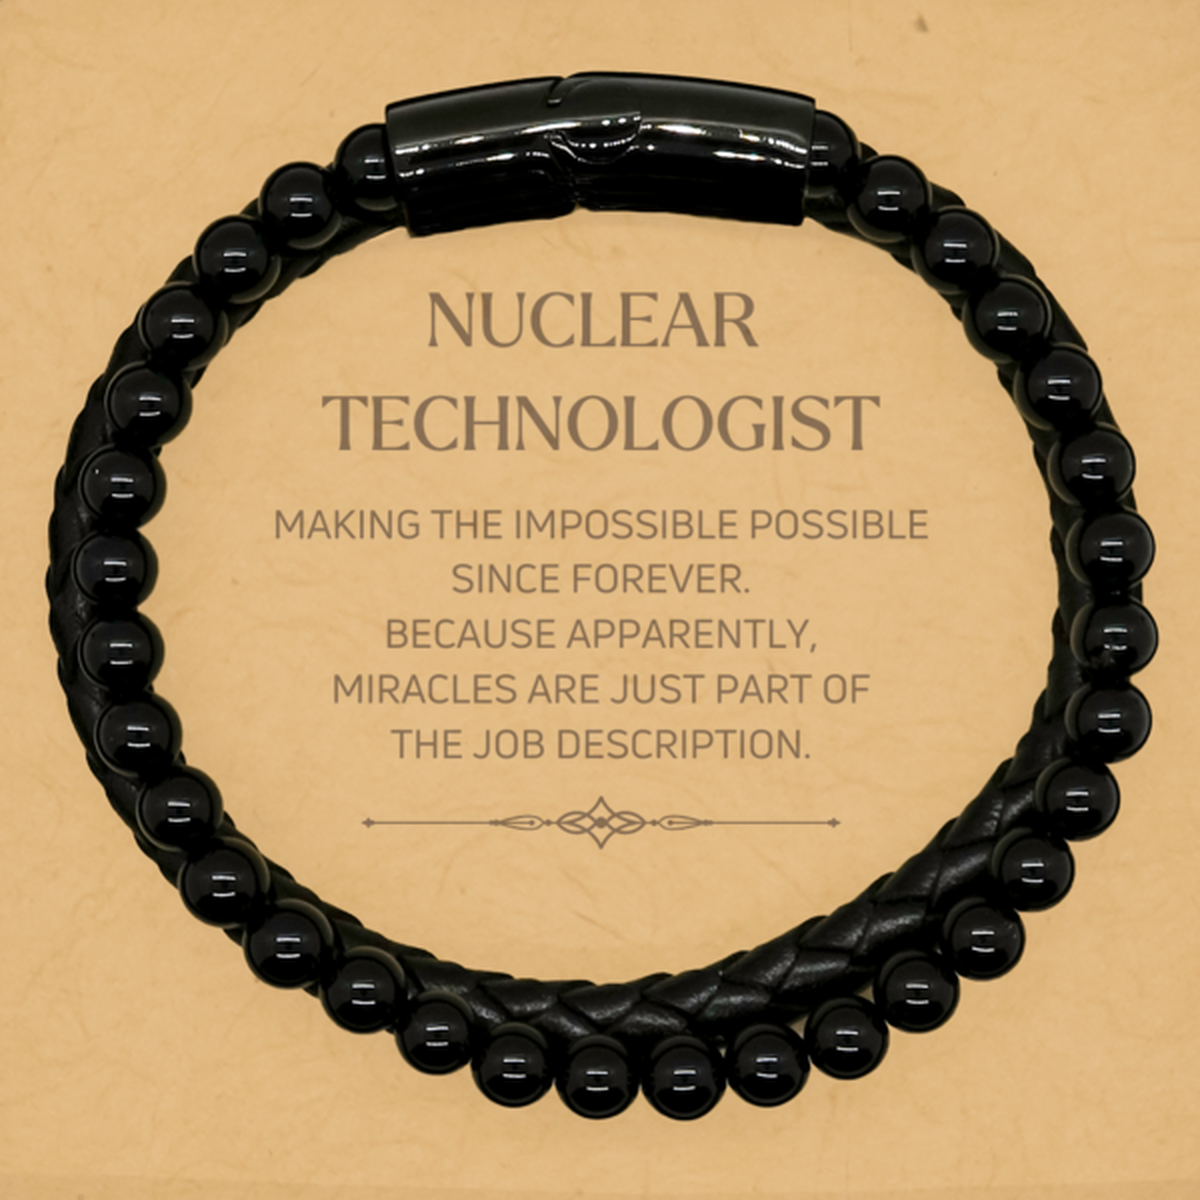 Funny Nuclear Technologist Gifts, Miracles are just part of the job description, Inspirational Birthday Stone Leather Bracelets For Nuclear Technologist, Men, Women, Coworkers, Friends, Boss